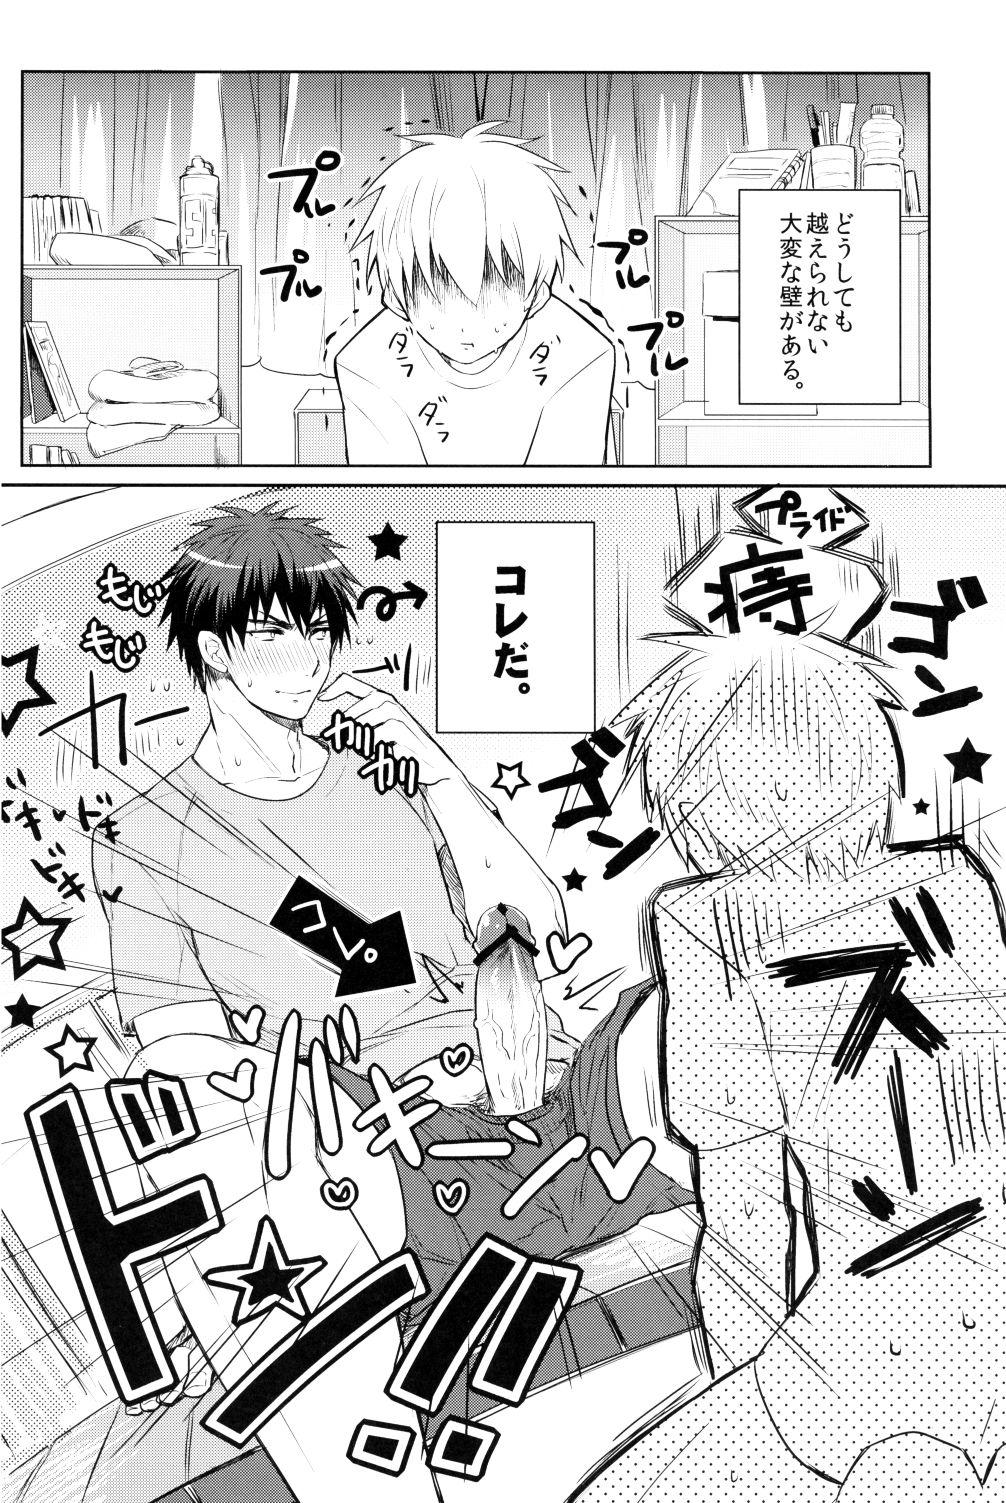 Kagami-kun's Thing is Amazing!! 6